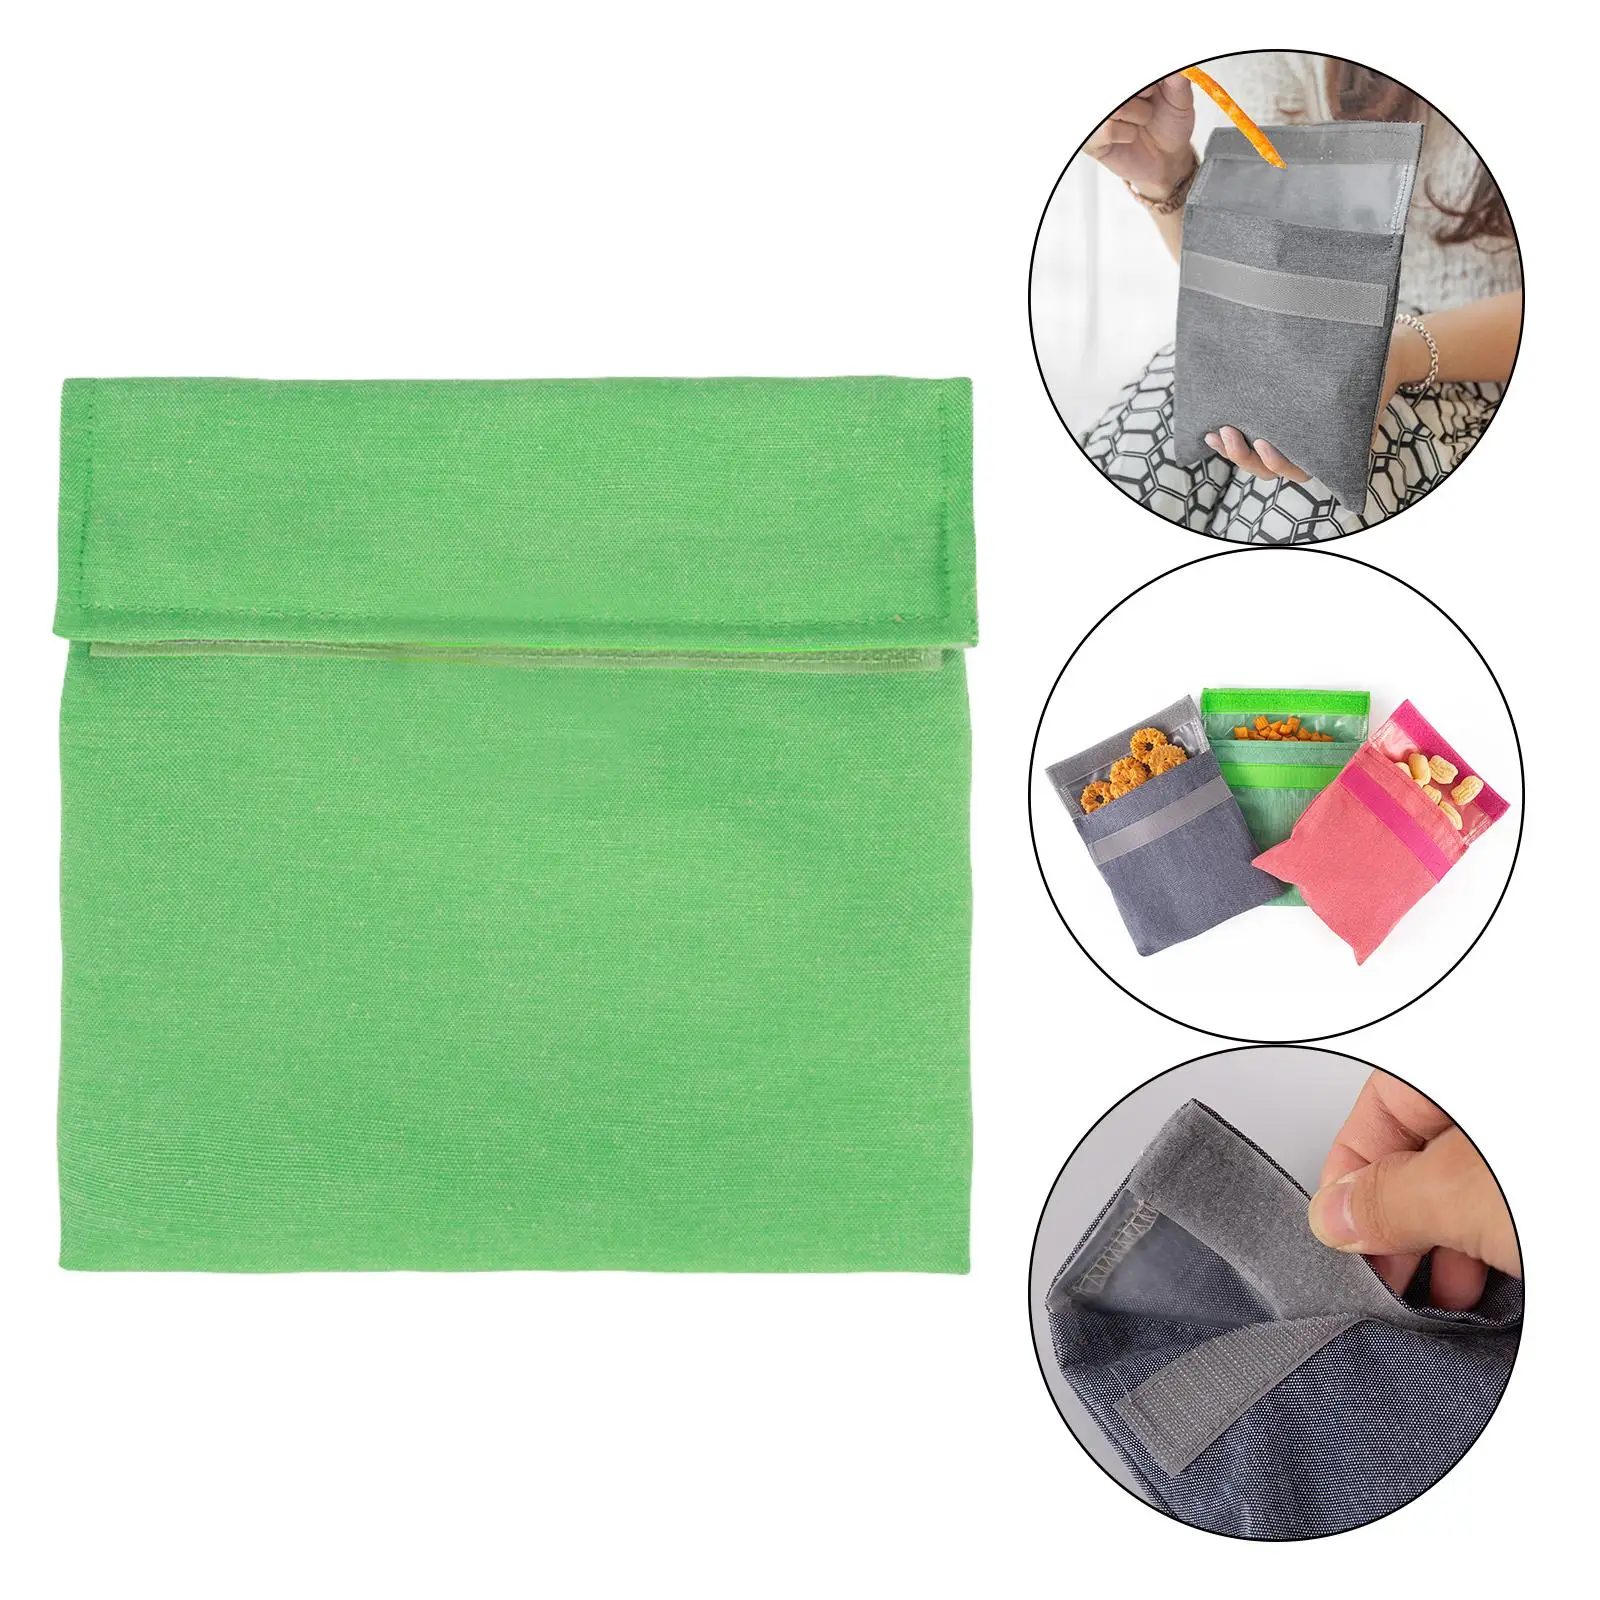 Fabric Container Fruit Storage Pouch Reusable Washable Food Storage Bag snack storage bag Sandwich Bag for Travel School